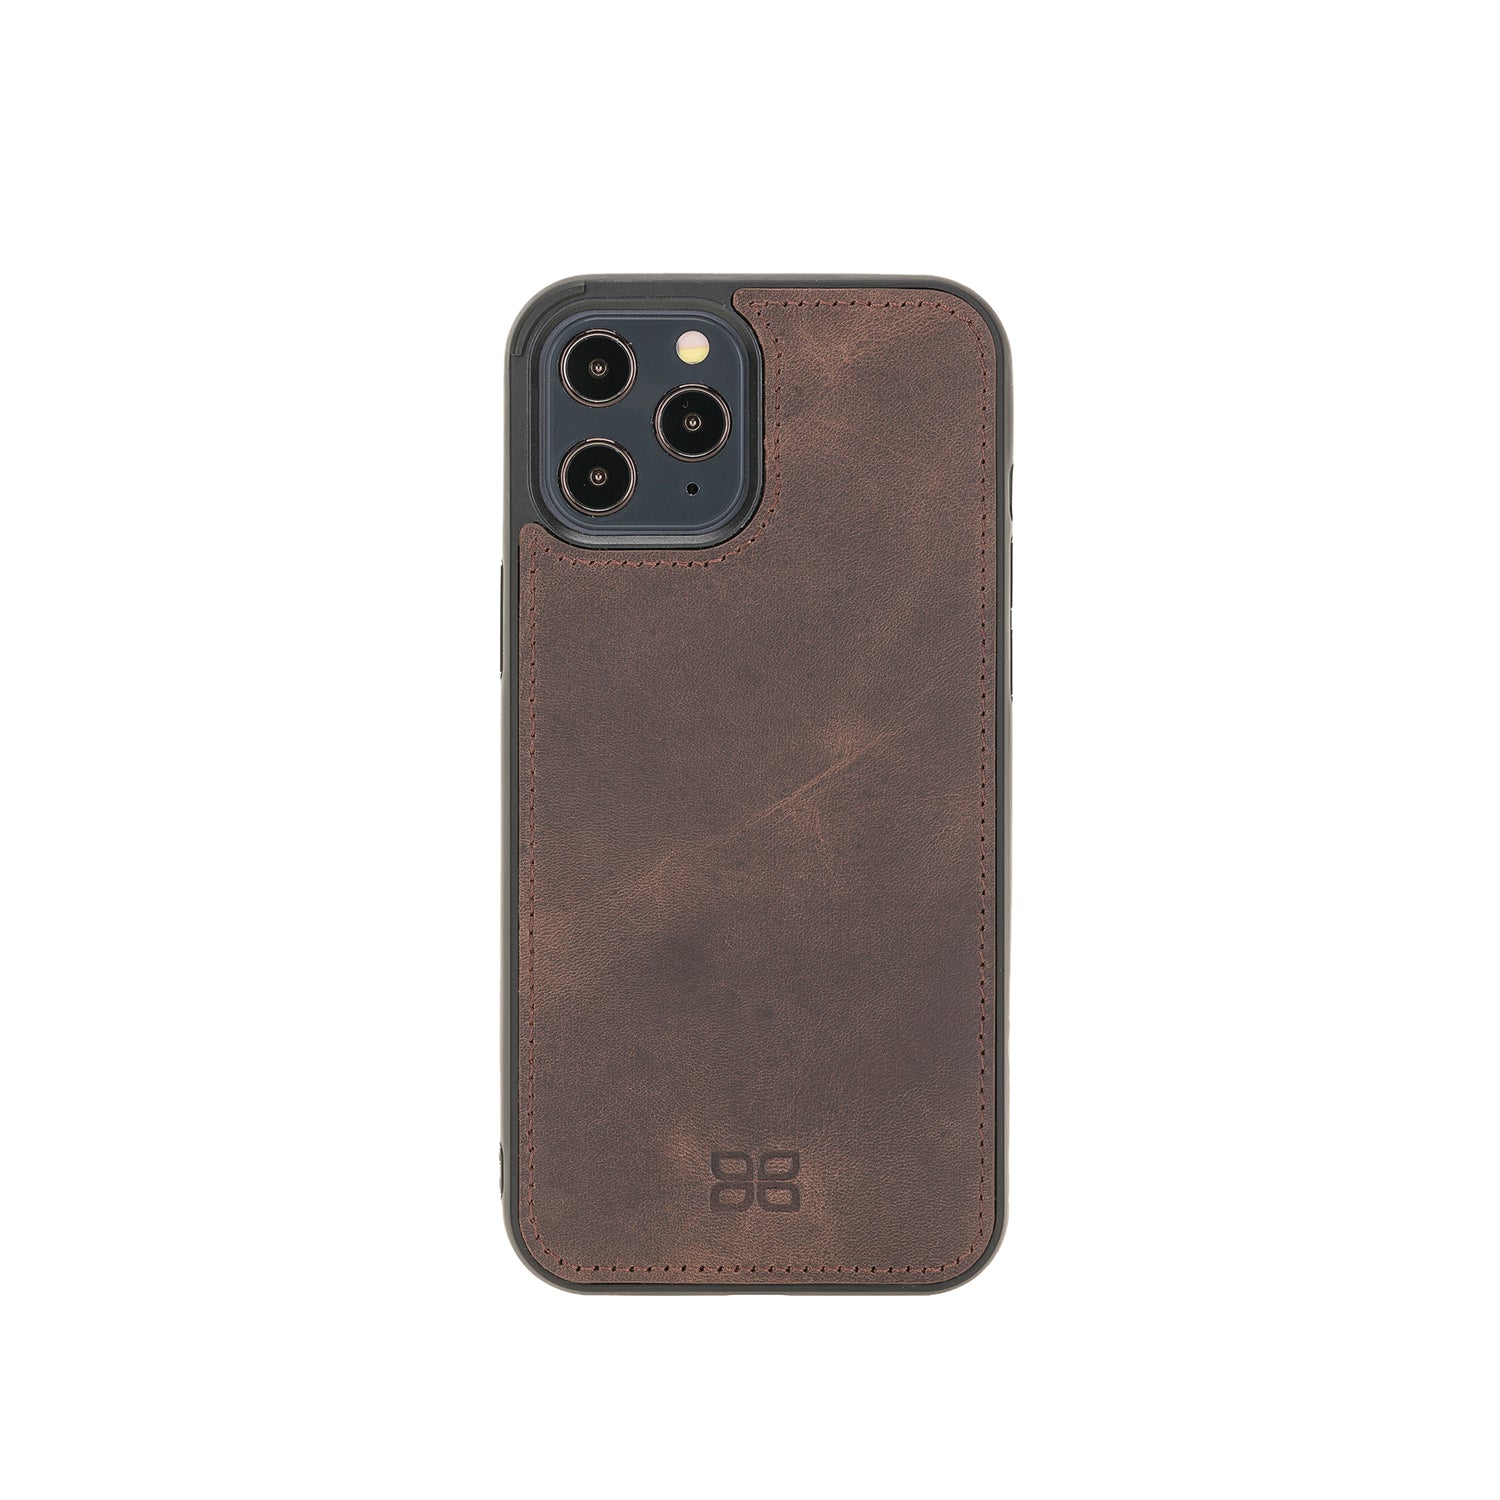 Flex Cover Leather Back Case for iPhone 12 Pro Max (6.7") - BROWN - saracleather